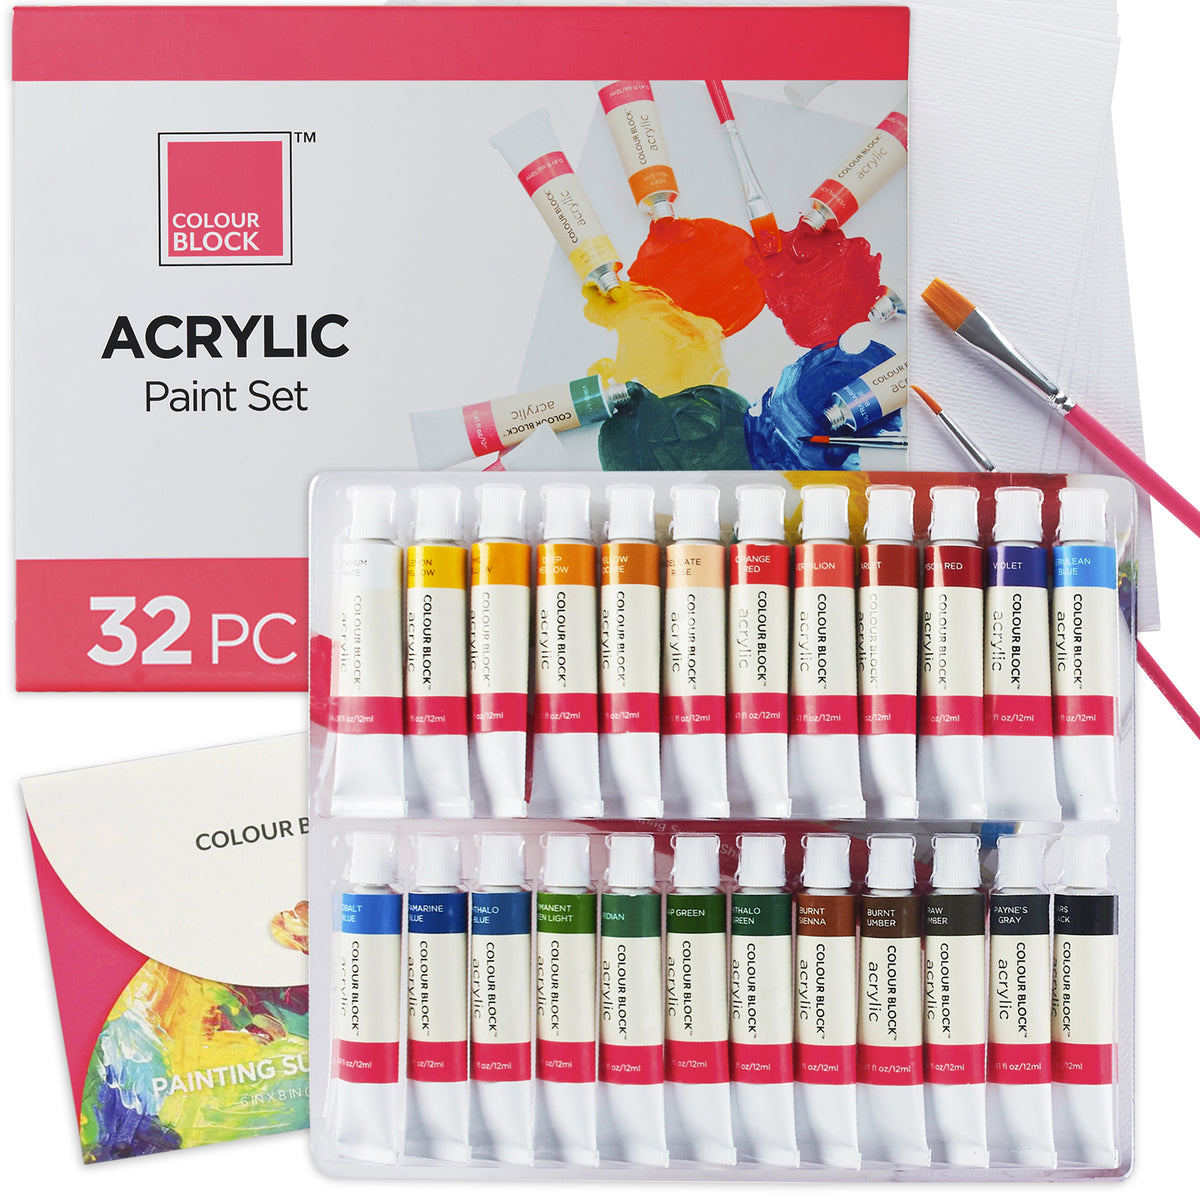 COLOUR BLOCK 32 Ultimate Watercolor Paint Set for Adults and